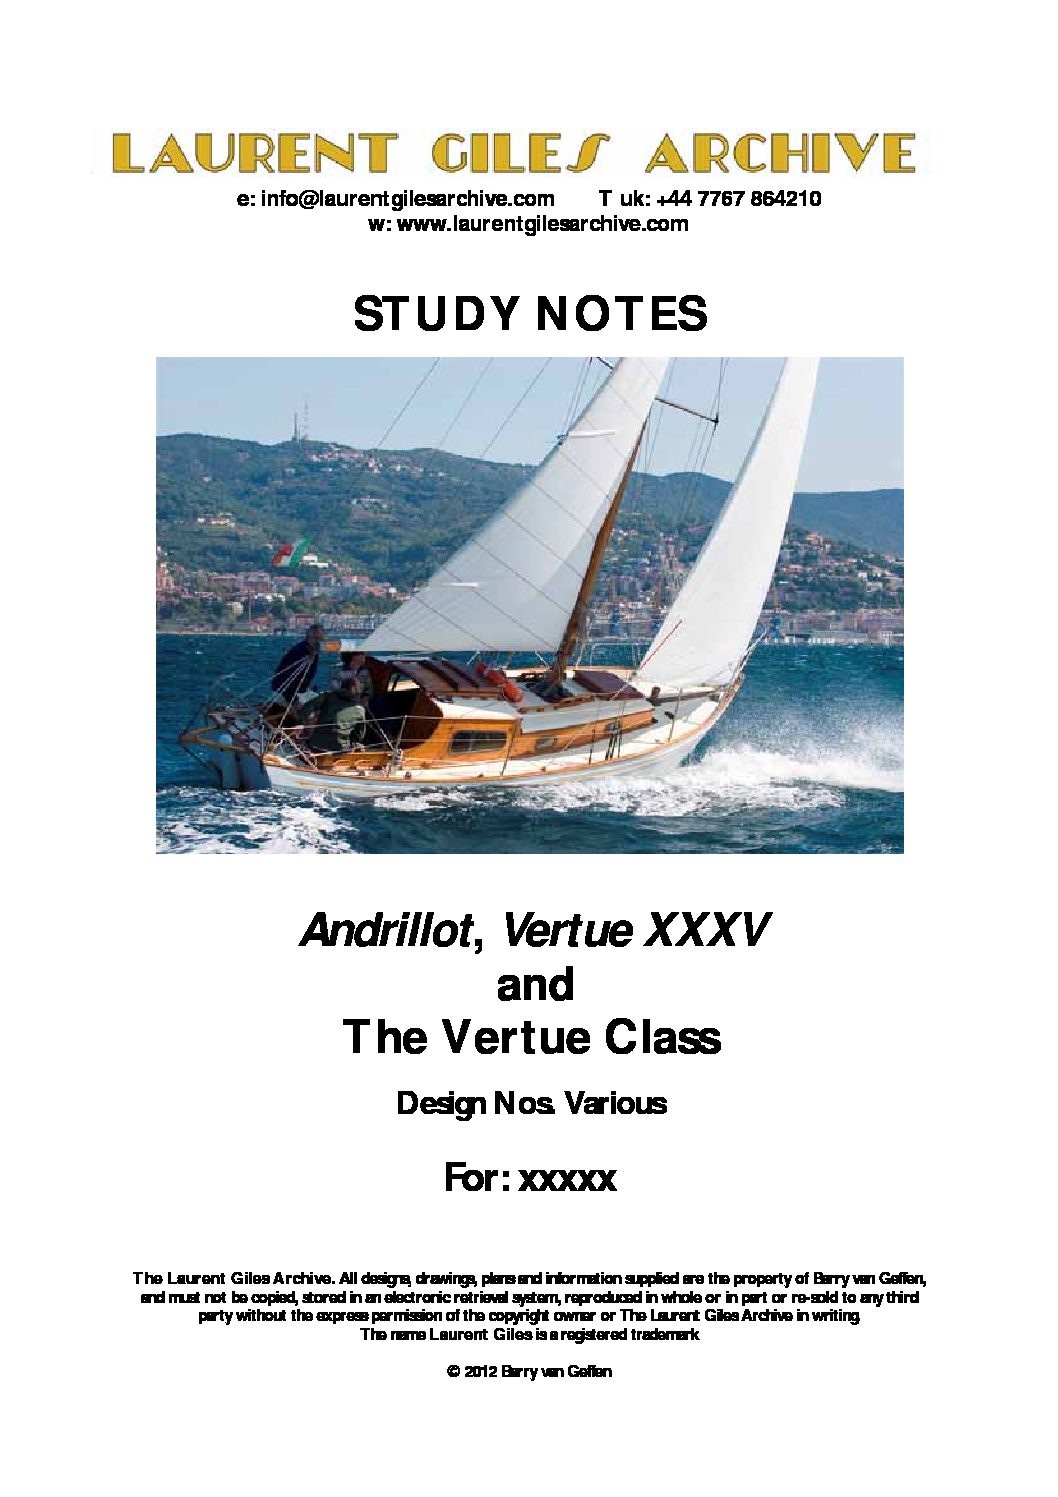 0015 Vertue Class 2015 front page